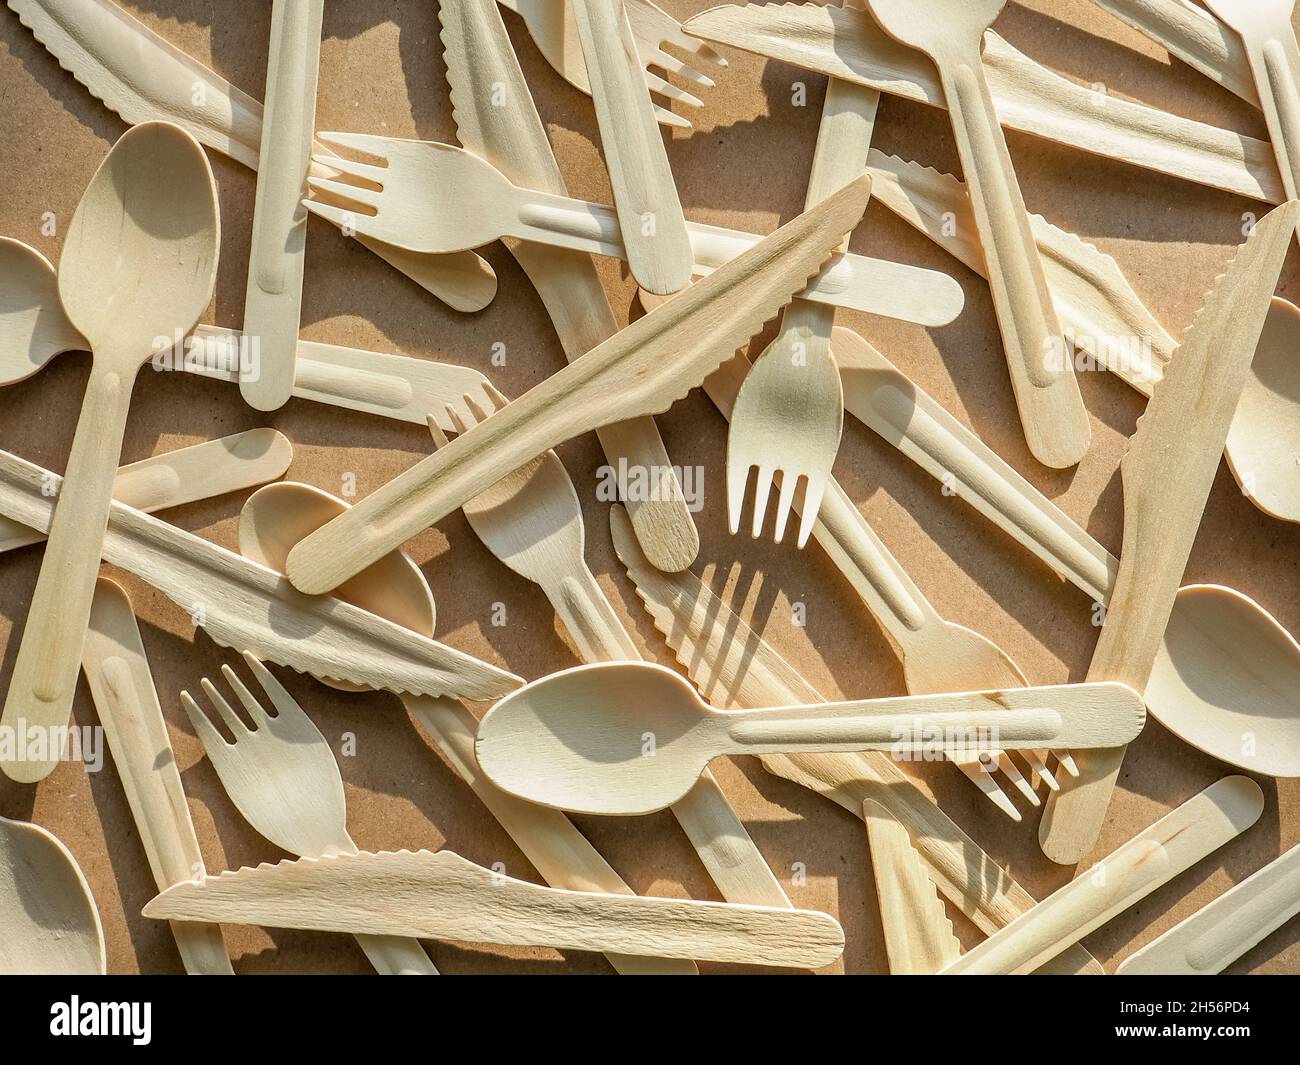 eco friendly disposable kitchenware utensils on craft paper background. Wooden forks, knives and spoons. Ecology, zero waste concept. top view. flat Stock Photo